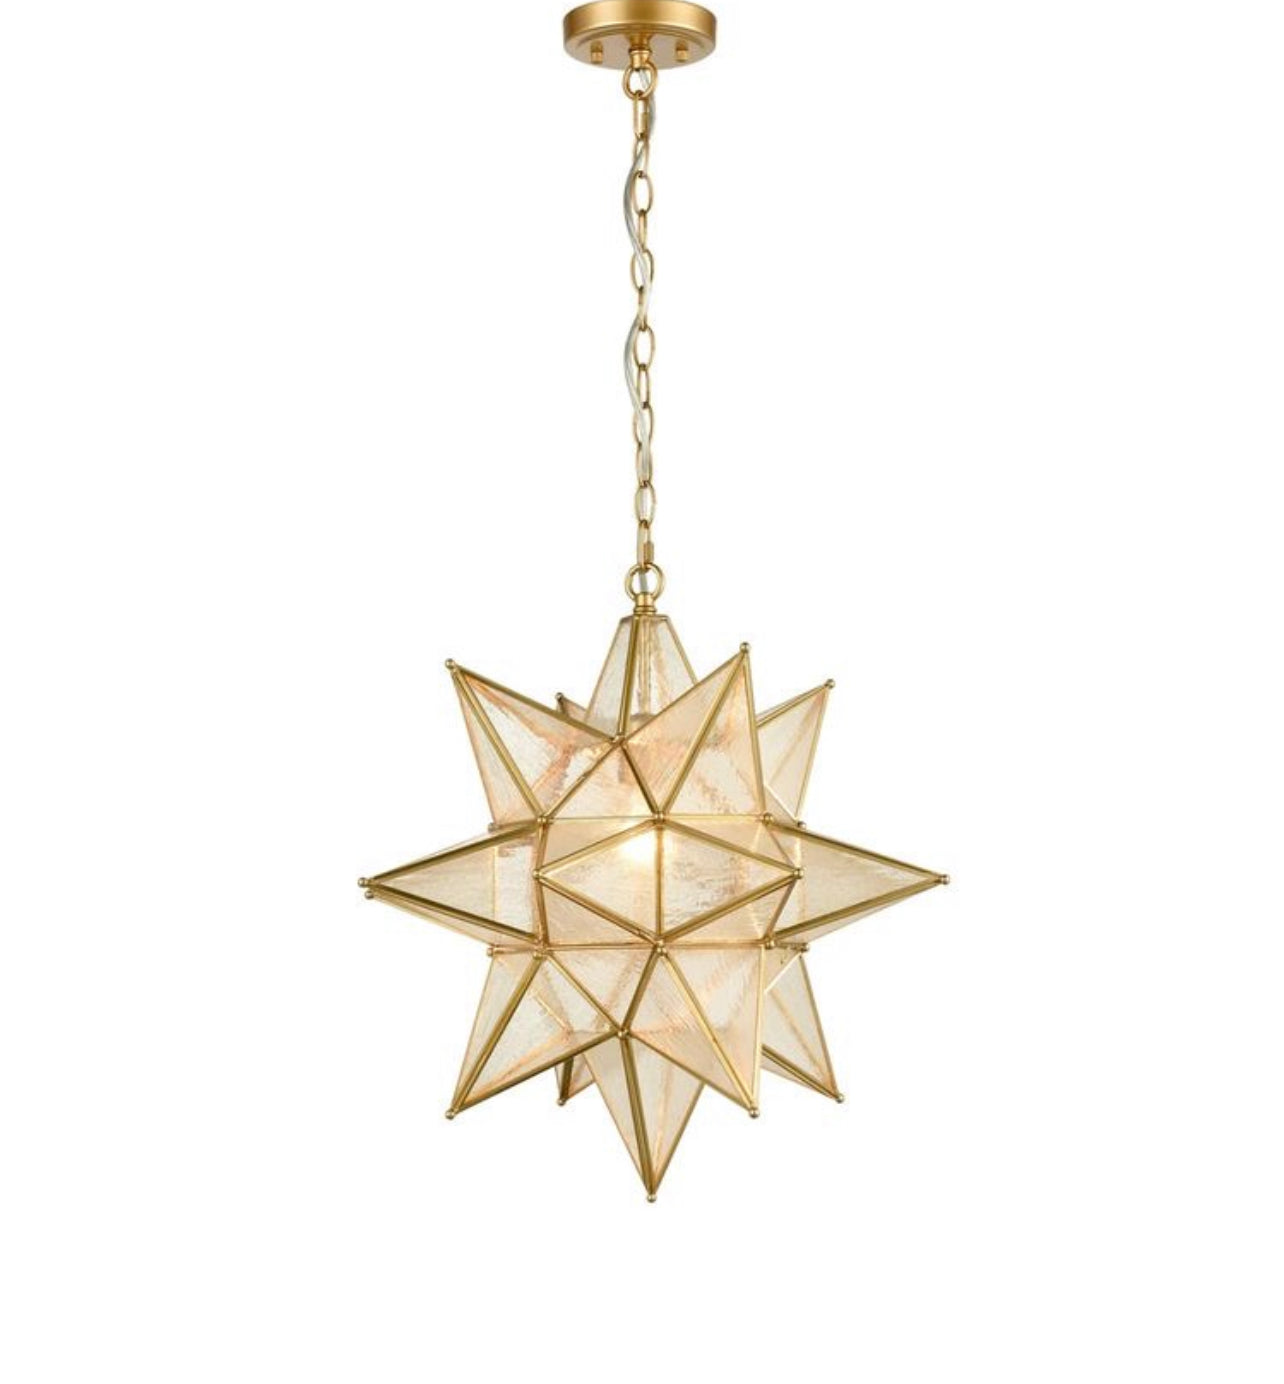 Moroccan Star Glass Ceiling Lamp - Ref. 1129